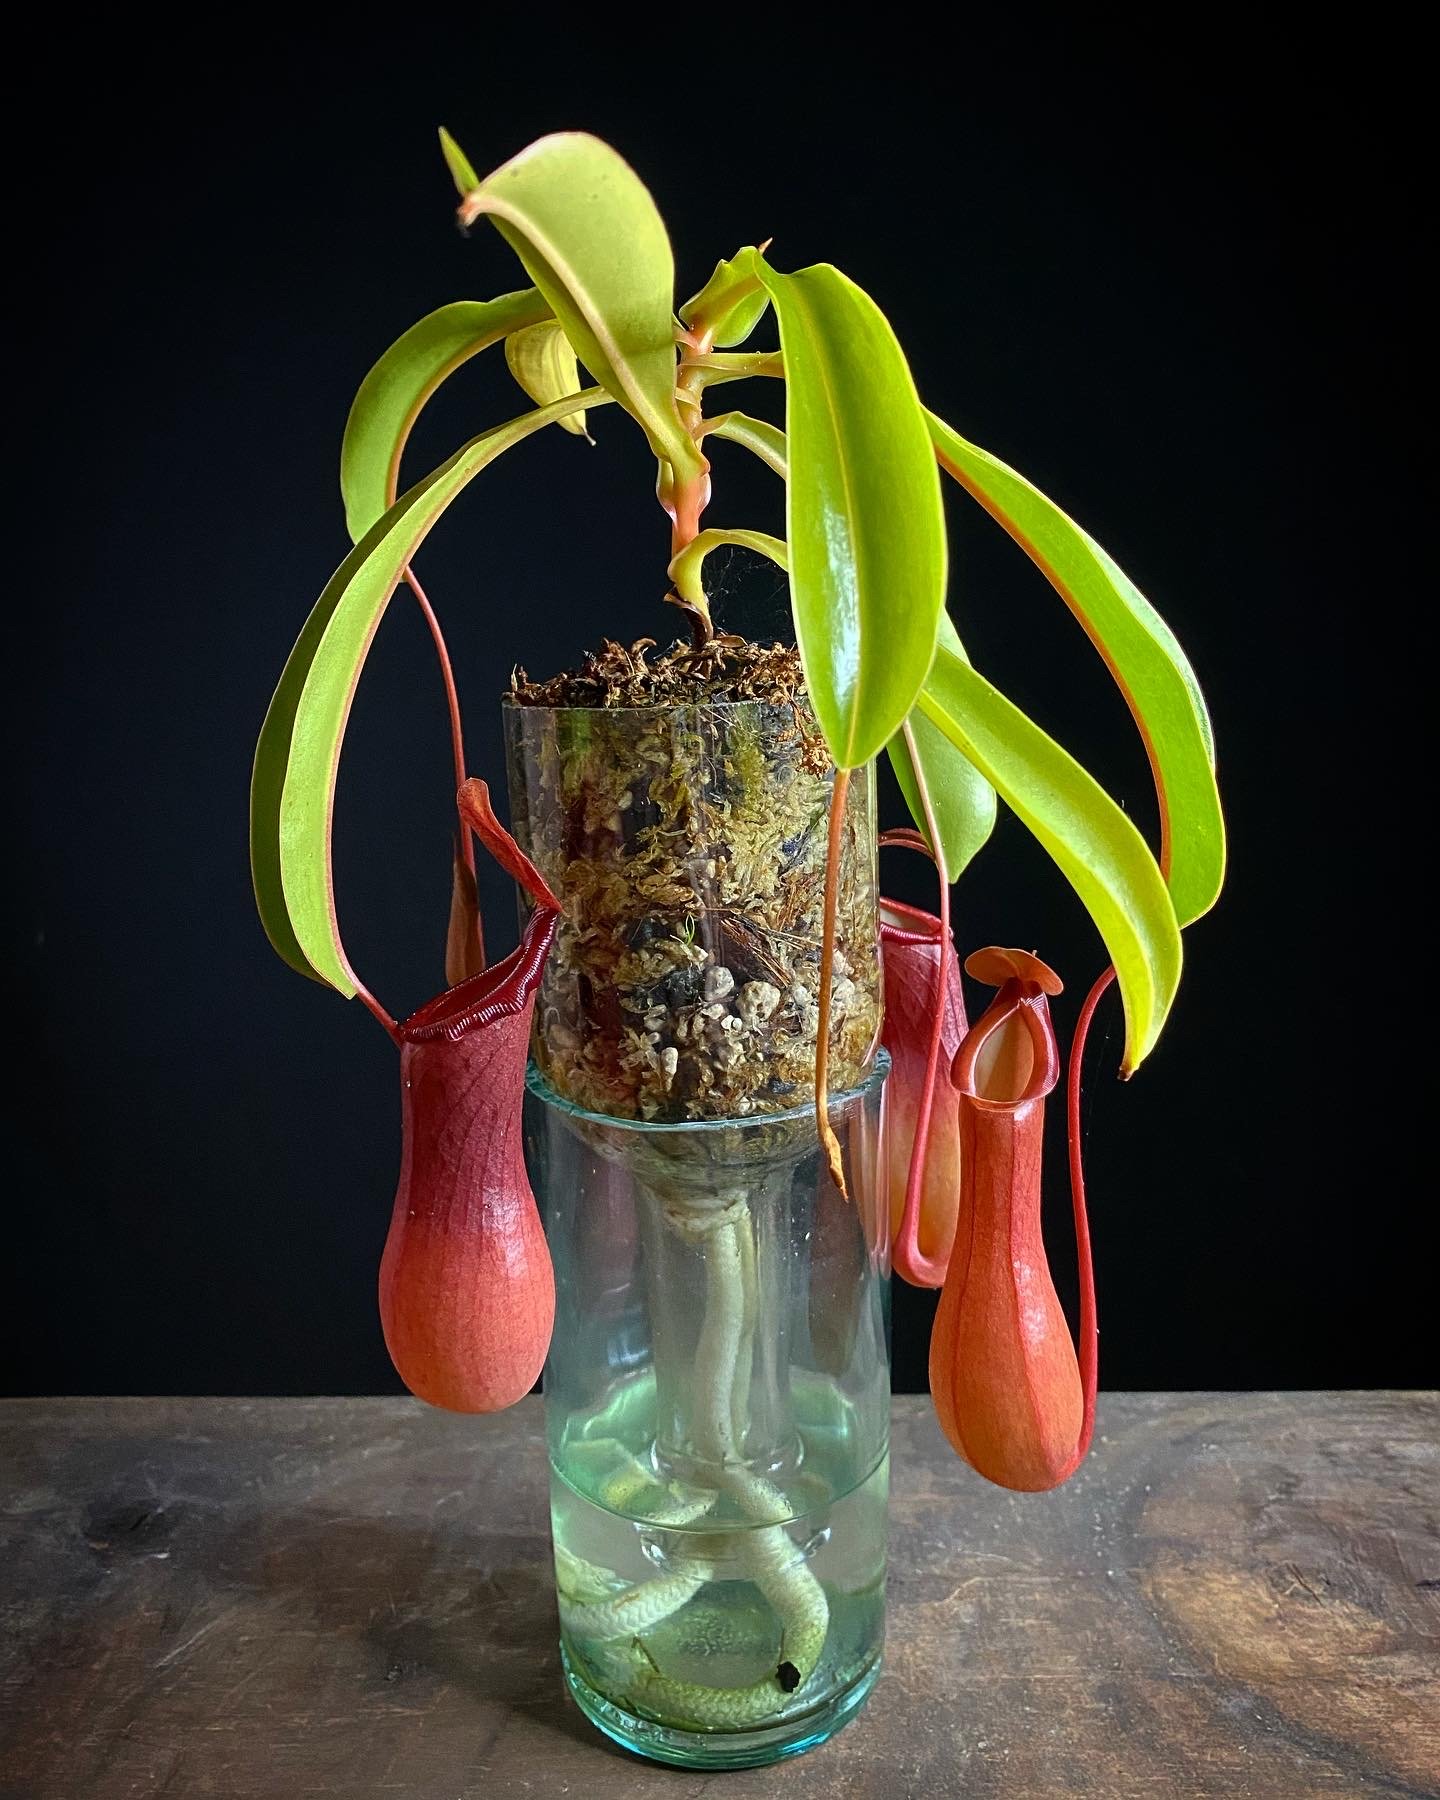 Nepenthes_12.jpg